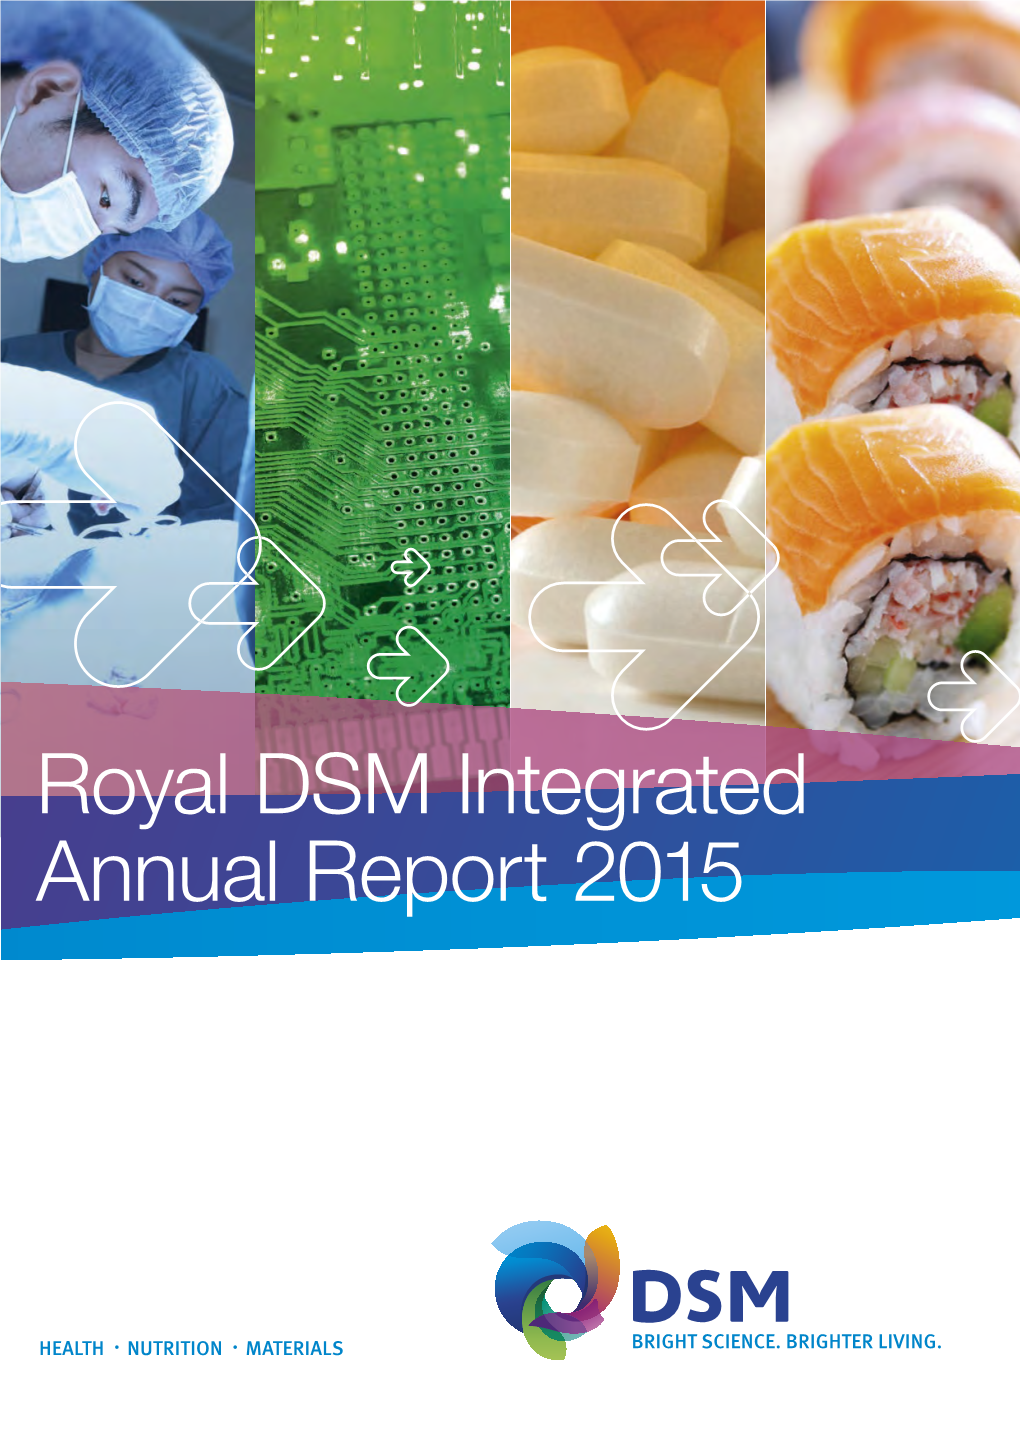 DSM's Integrated Annual Report 2015